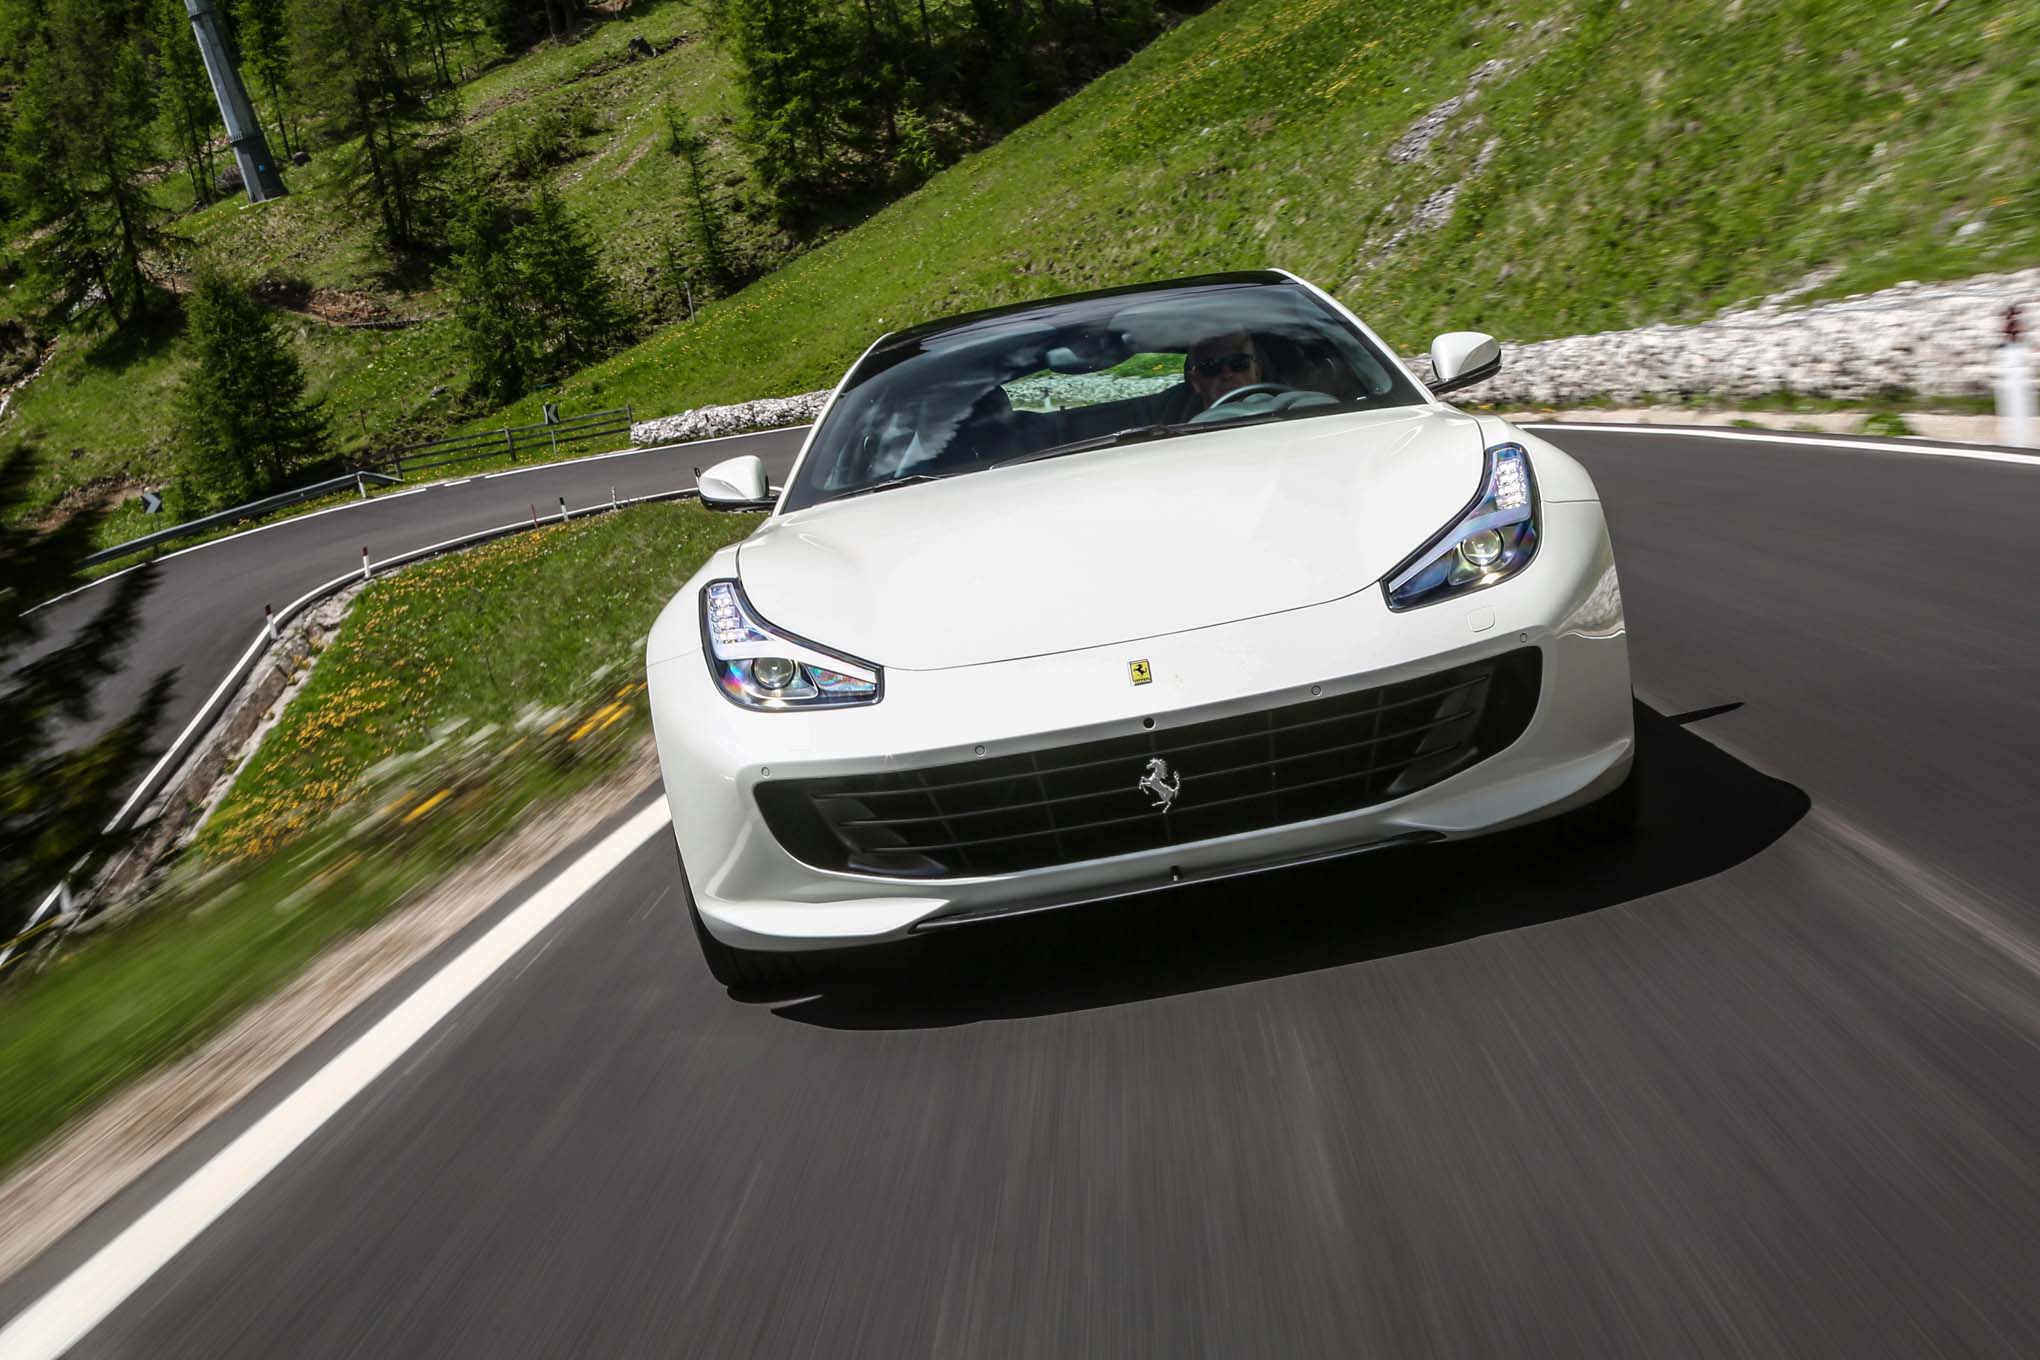 Ferrari GTC4 Lusso T Is The First Four Seat Ferrari With A